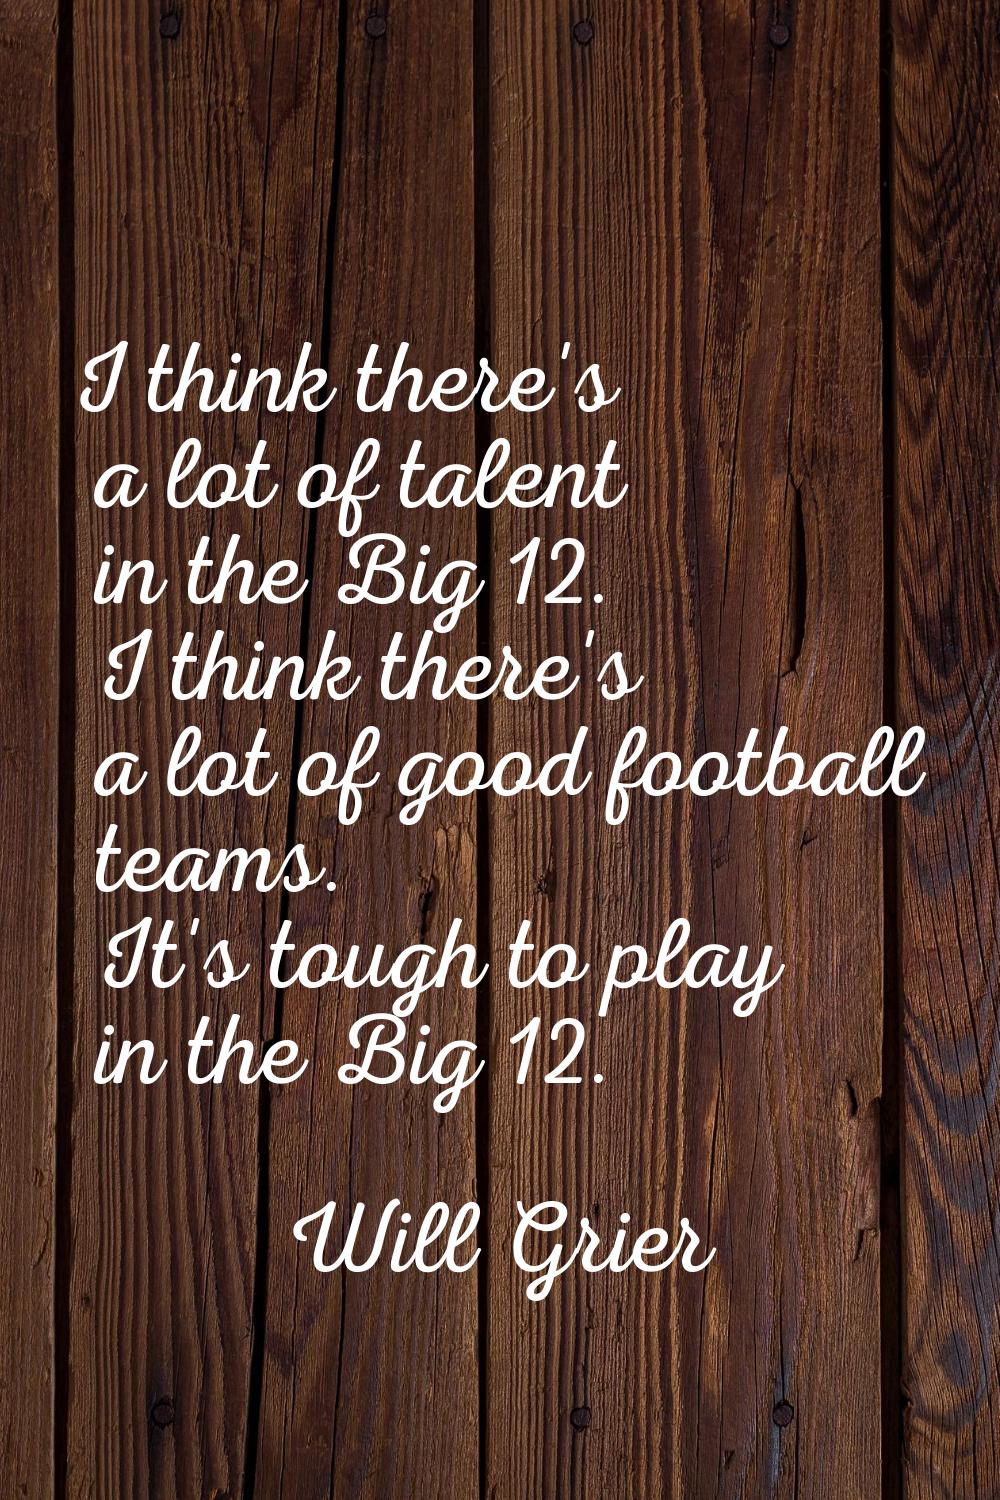 I think there's a lot of talent in the Big 12. I think there's a lot of good football teams. It's t